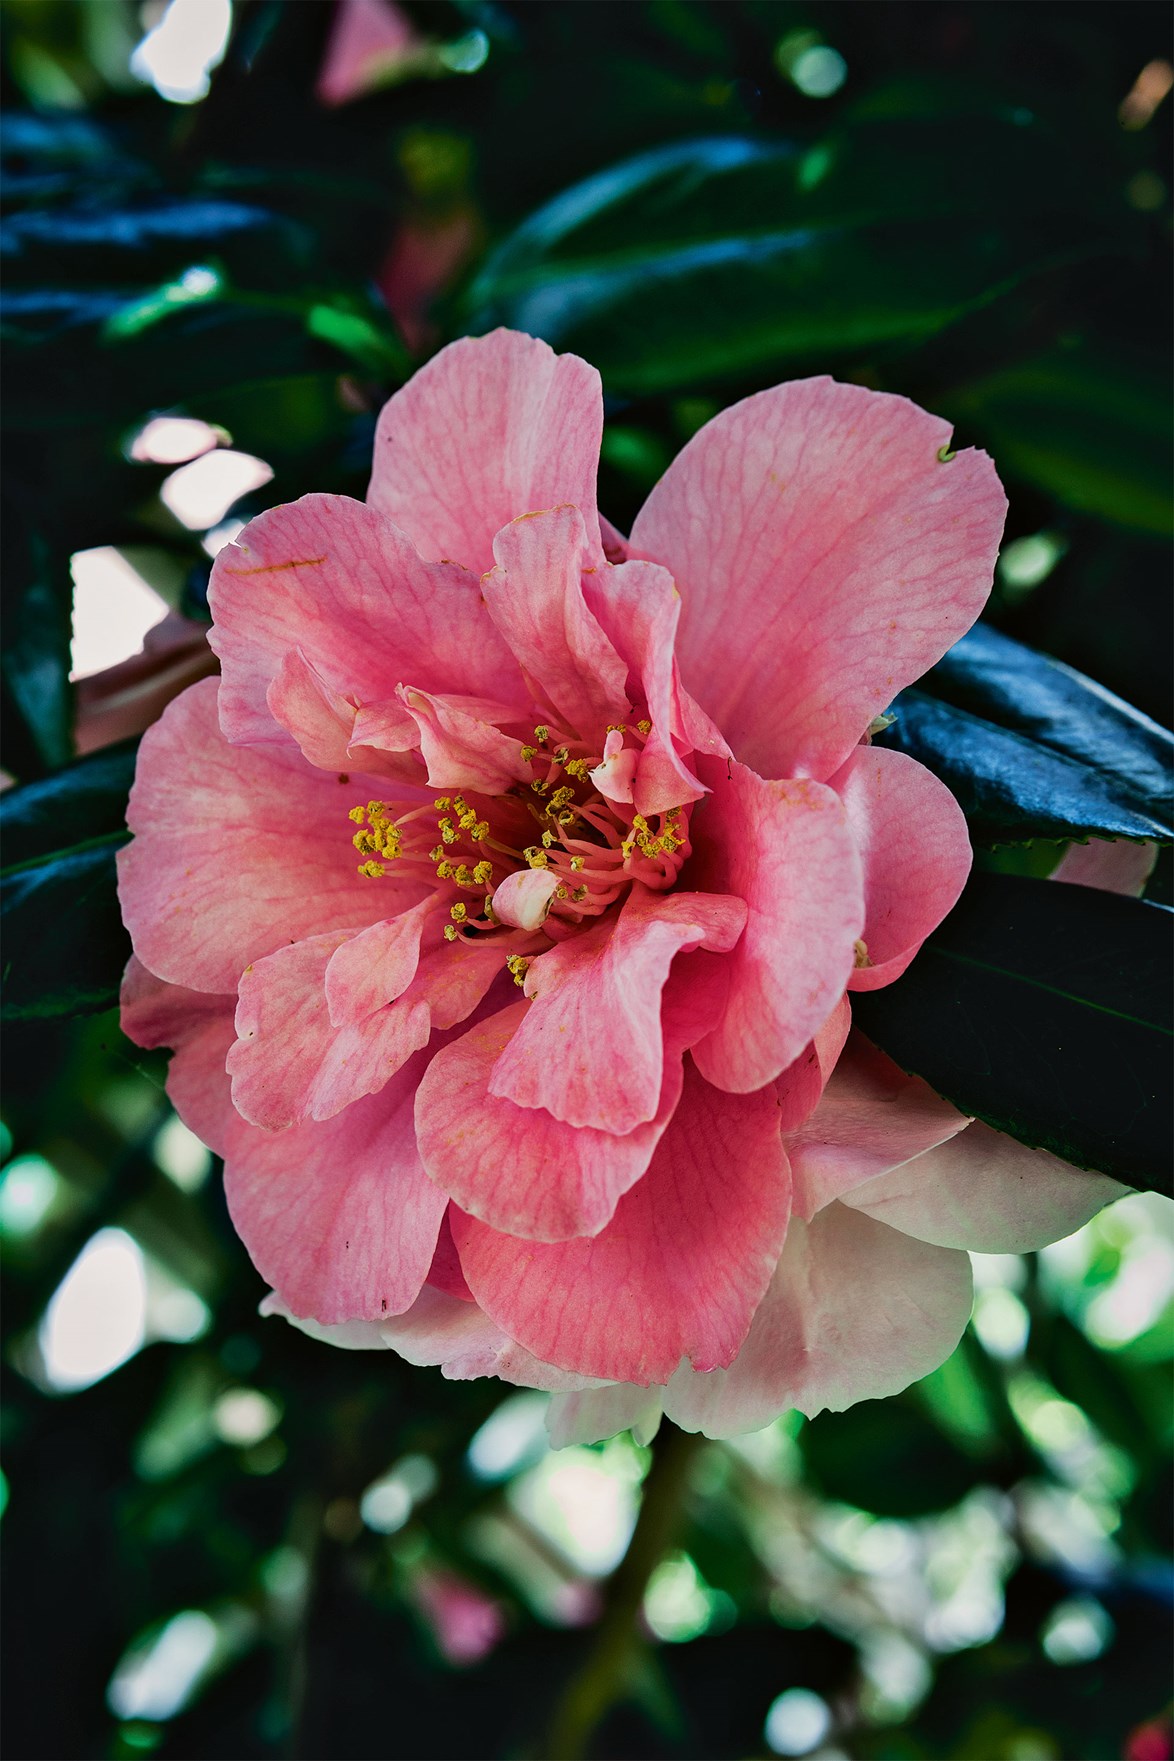 **Camellia** Camellia flowers can range from white to dusty pink to red or a combination of all three. There are two main camellia species grown in gardens and many hybrids. These are Camellia sasanqua (usually just called sasanquas) and [Camellia japonica](https://www.homestolove.com.au/plant-guide-camellia-japonica-9523|target="_blank") (pictured).